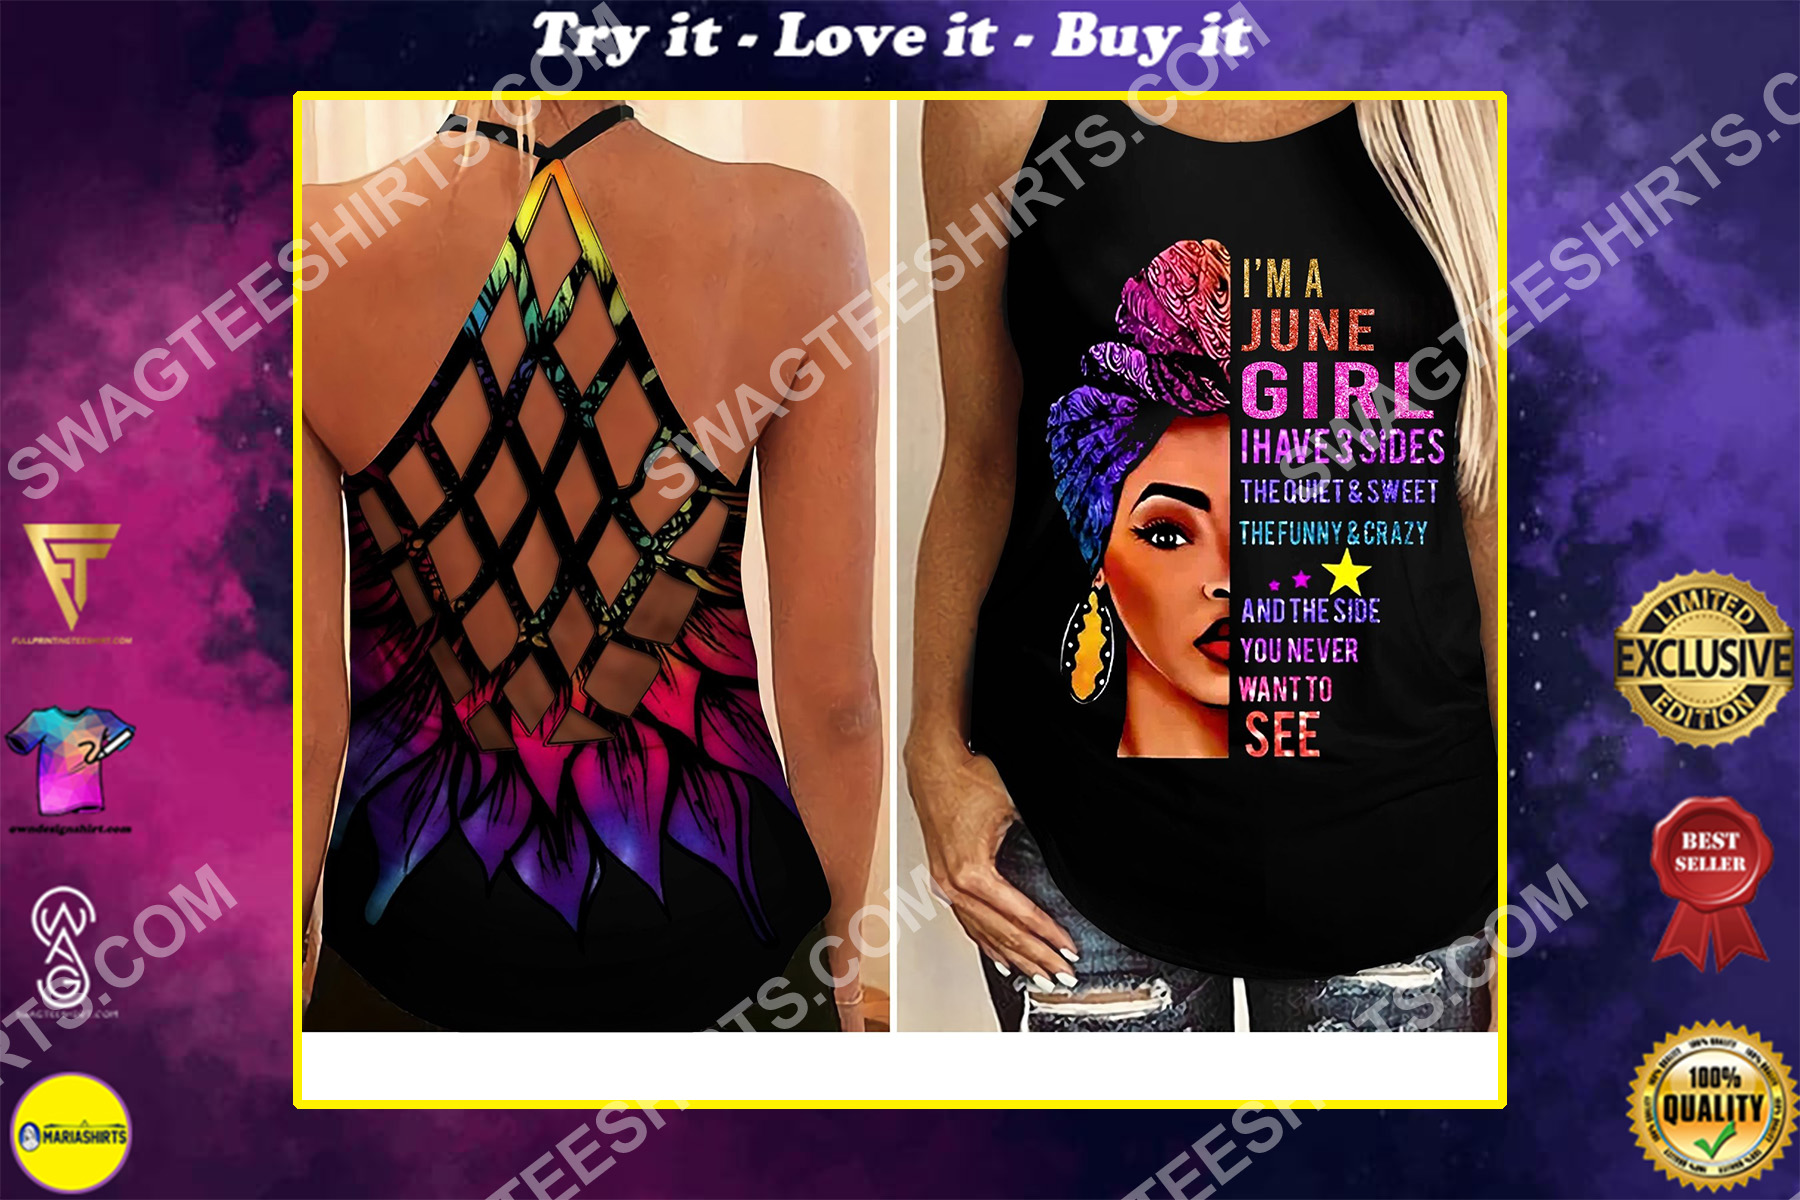 i'm a june girl i have 3 sides the quiet and sweet all over printed criss-cross tank top